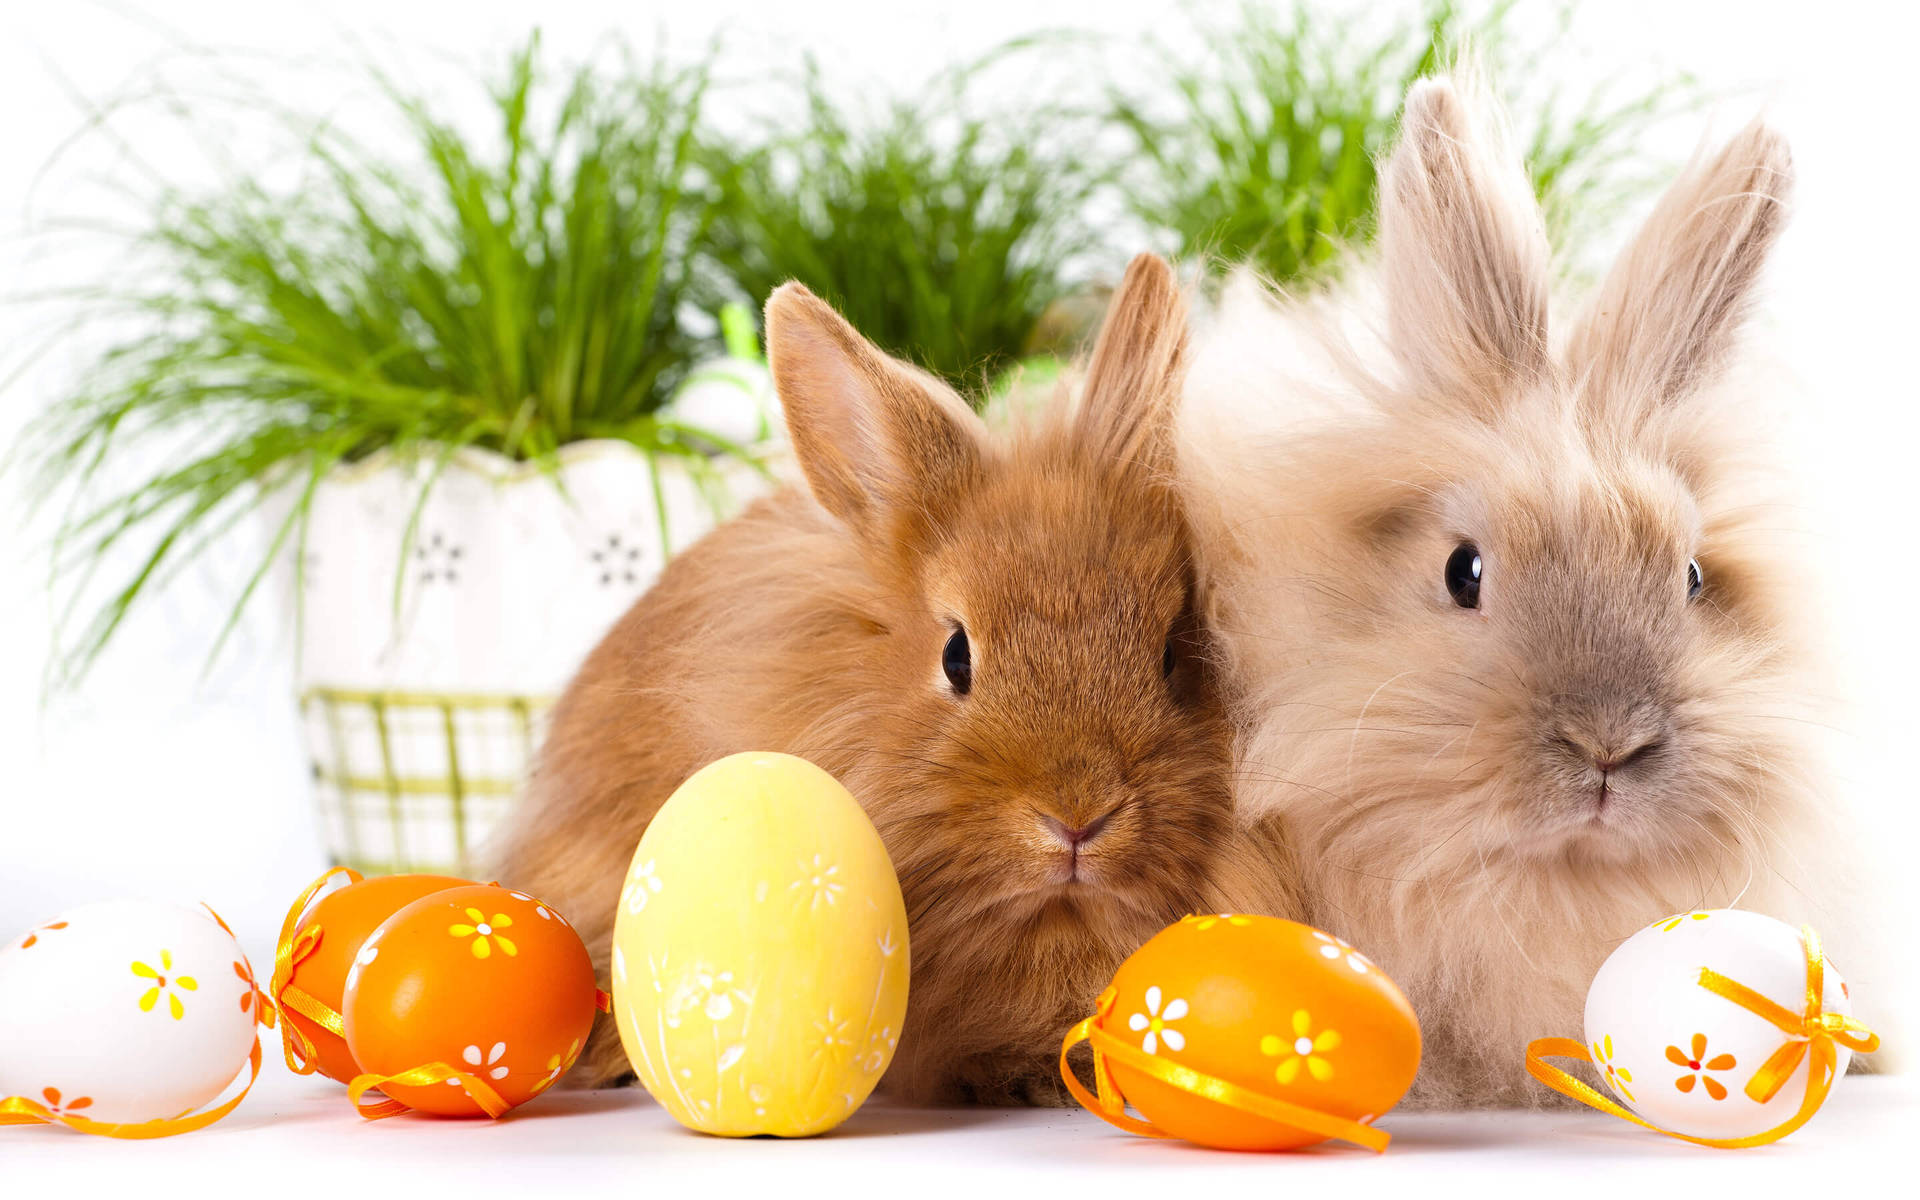 Free Easter Wallpaper Downloads, [200+] Easter Wallpapers for FREE |  